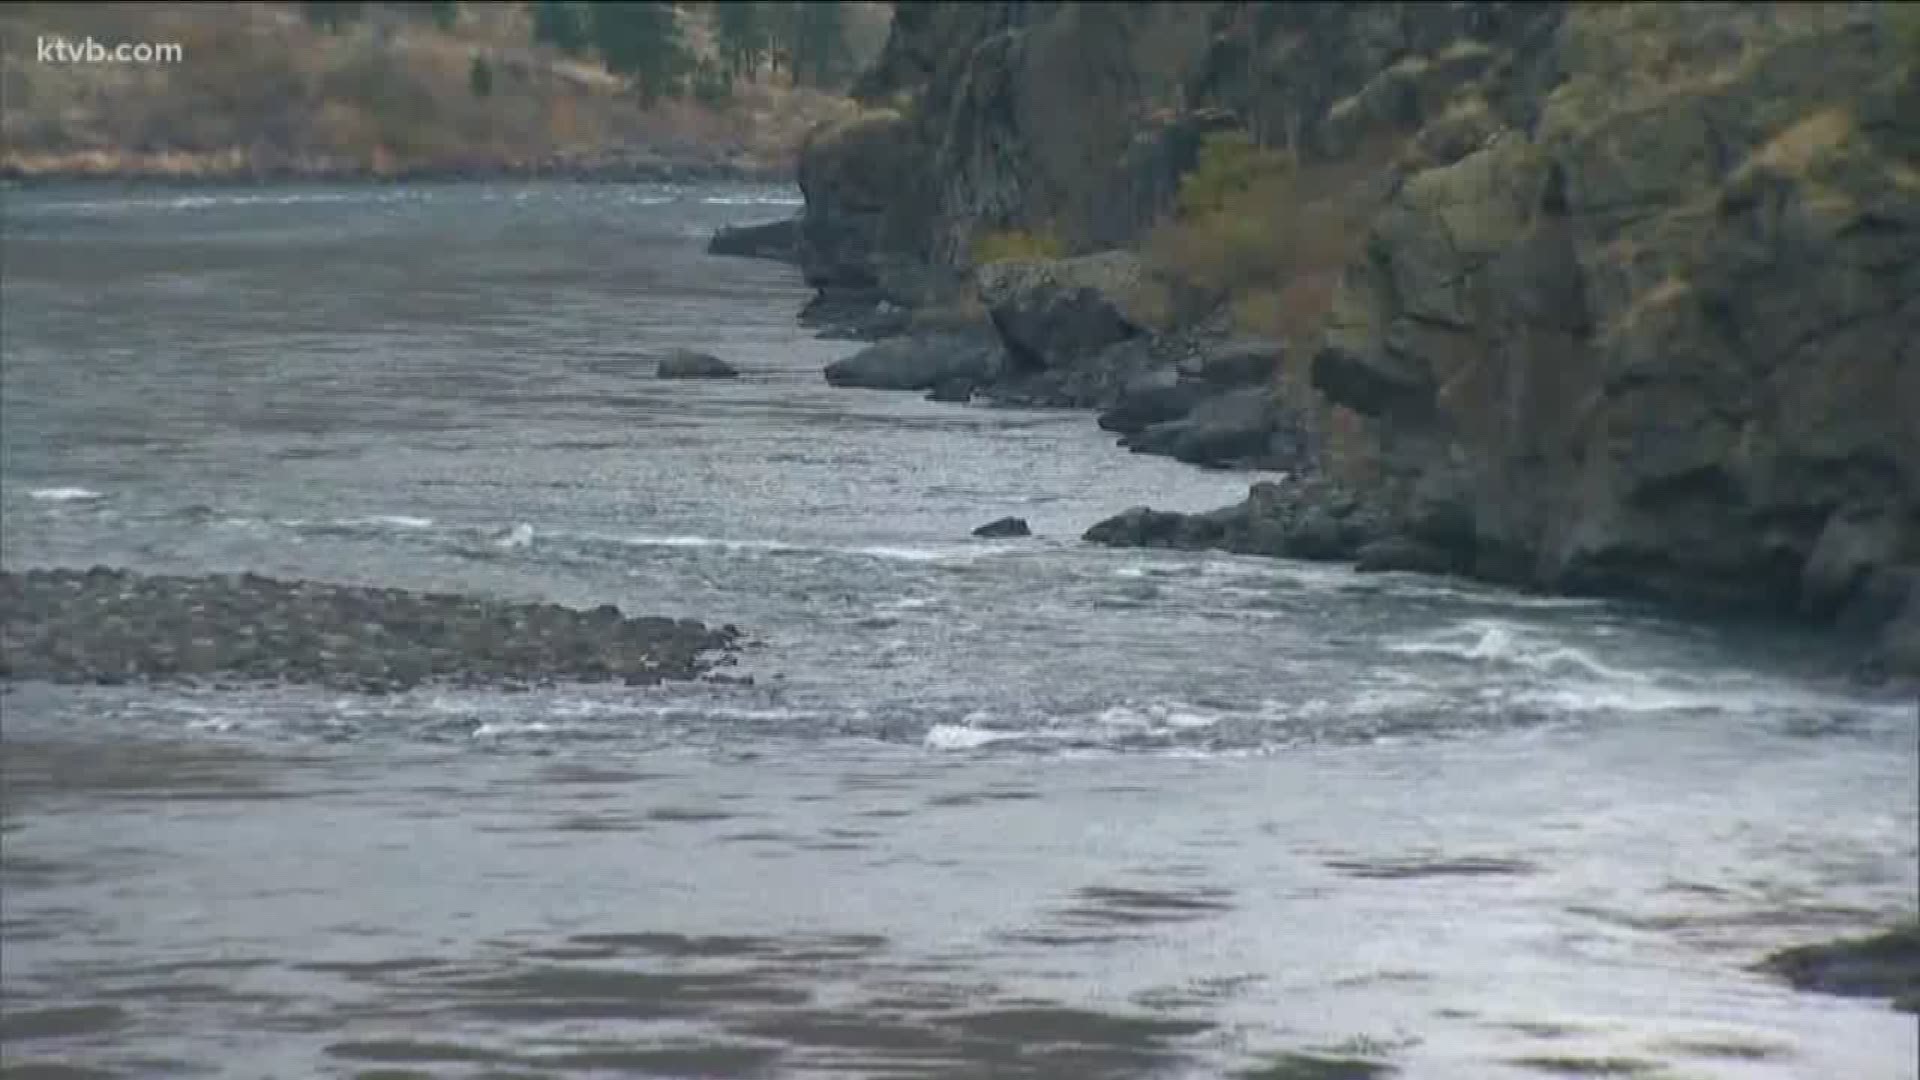 The agreement allows for the steelhead fishing to continue throughout most of Idaho, but two areas on the Salmon River and South Fork of the Clearwater are still closed.